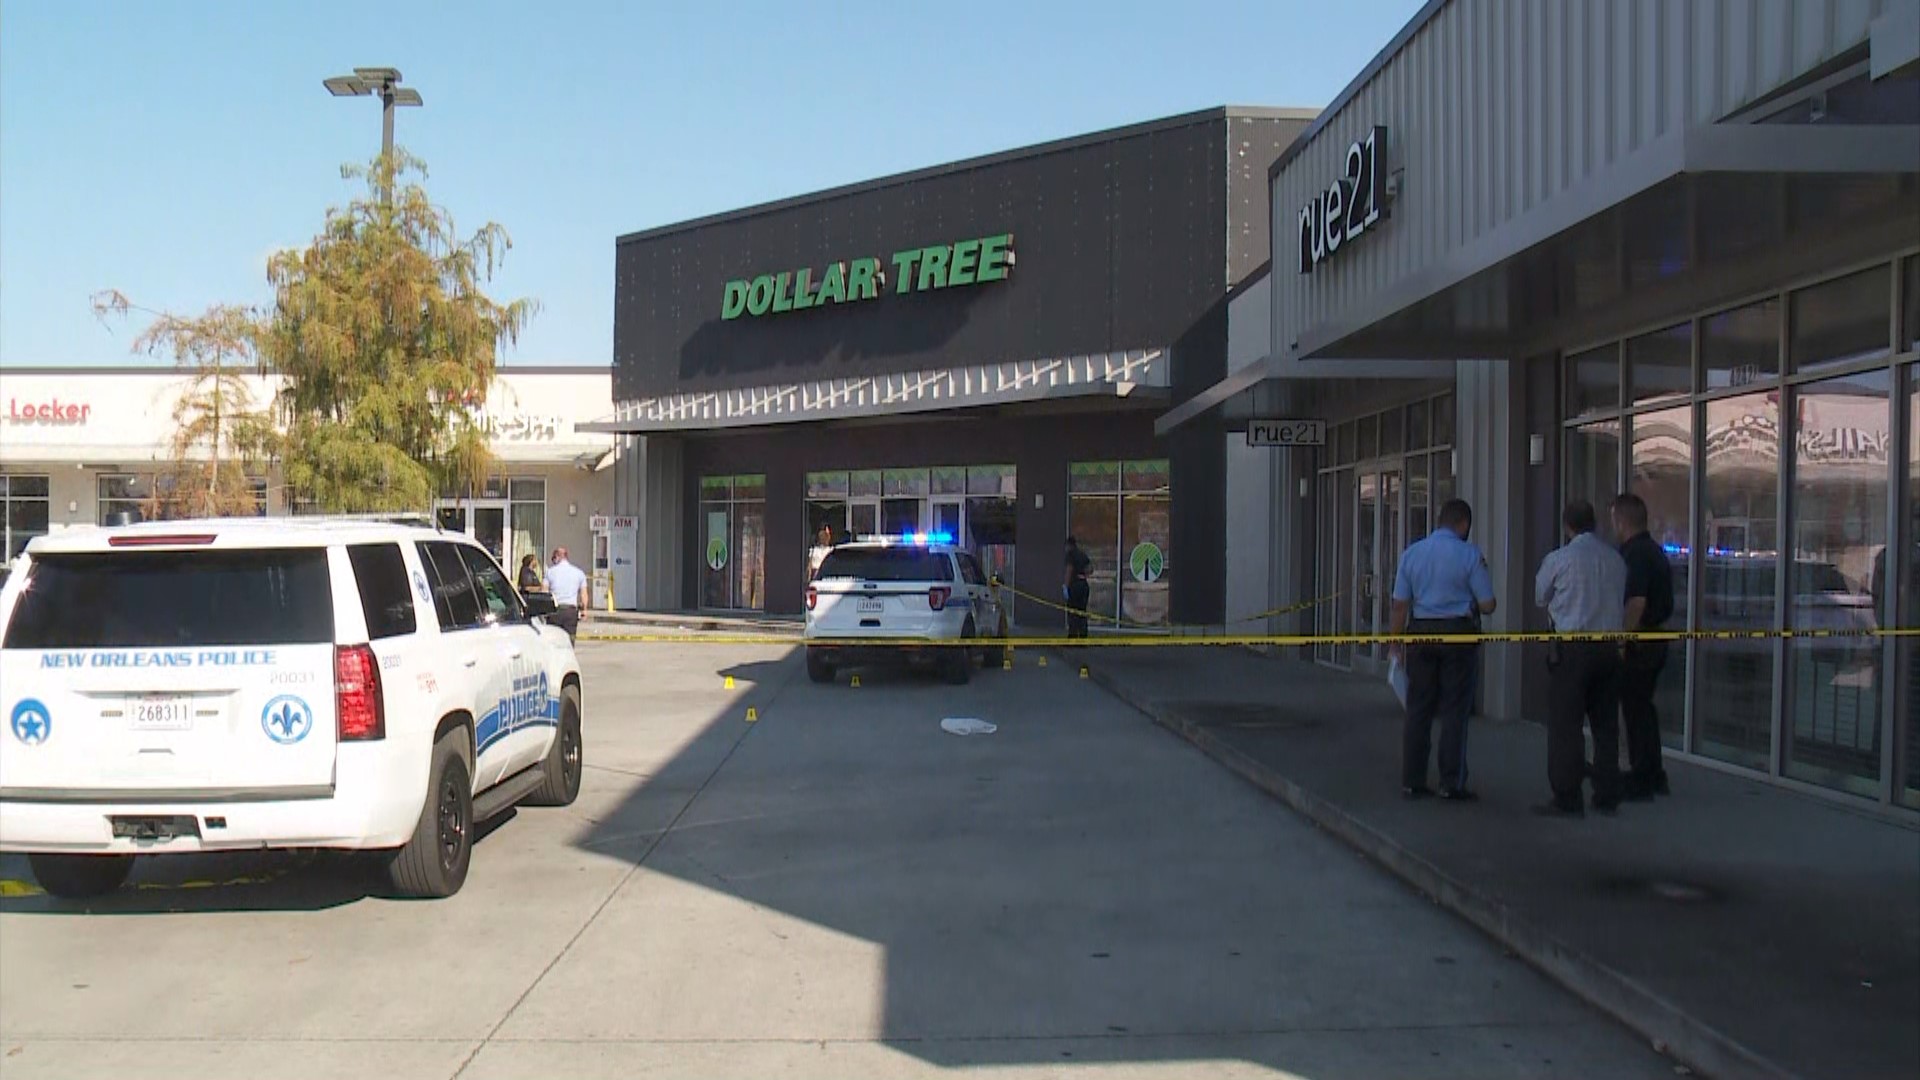 New Orleans Police say four people were wounded at a shooting outside a Dollar Tree store on Thursday.